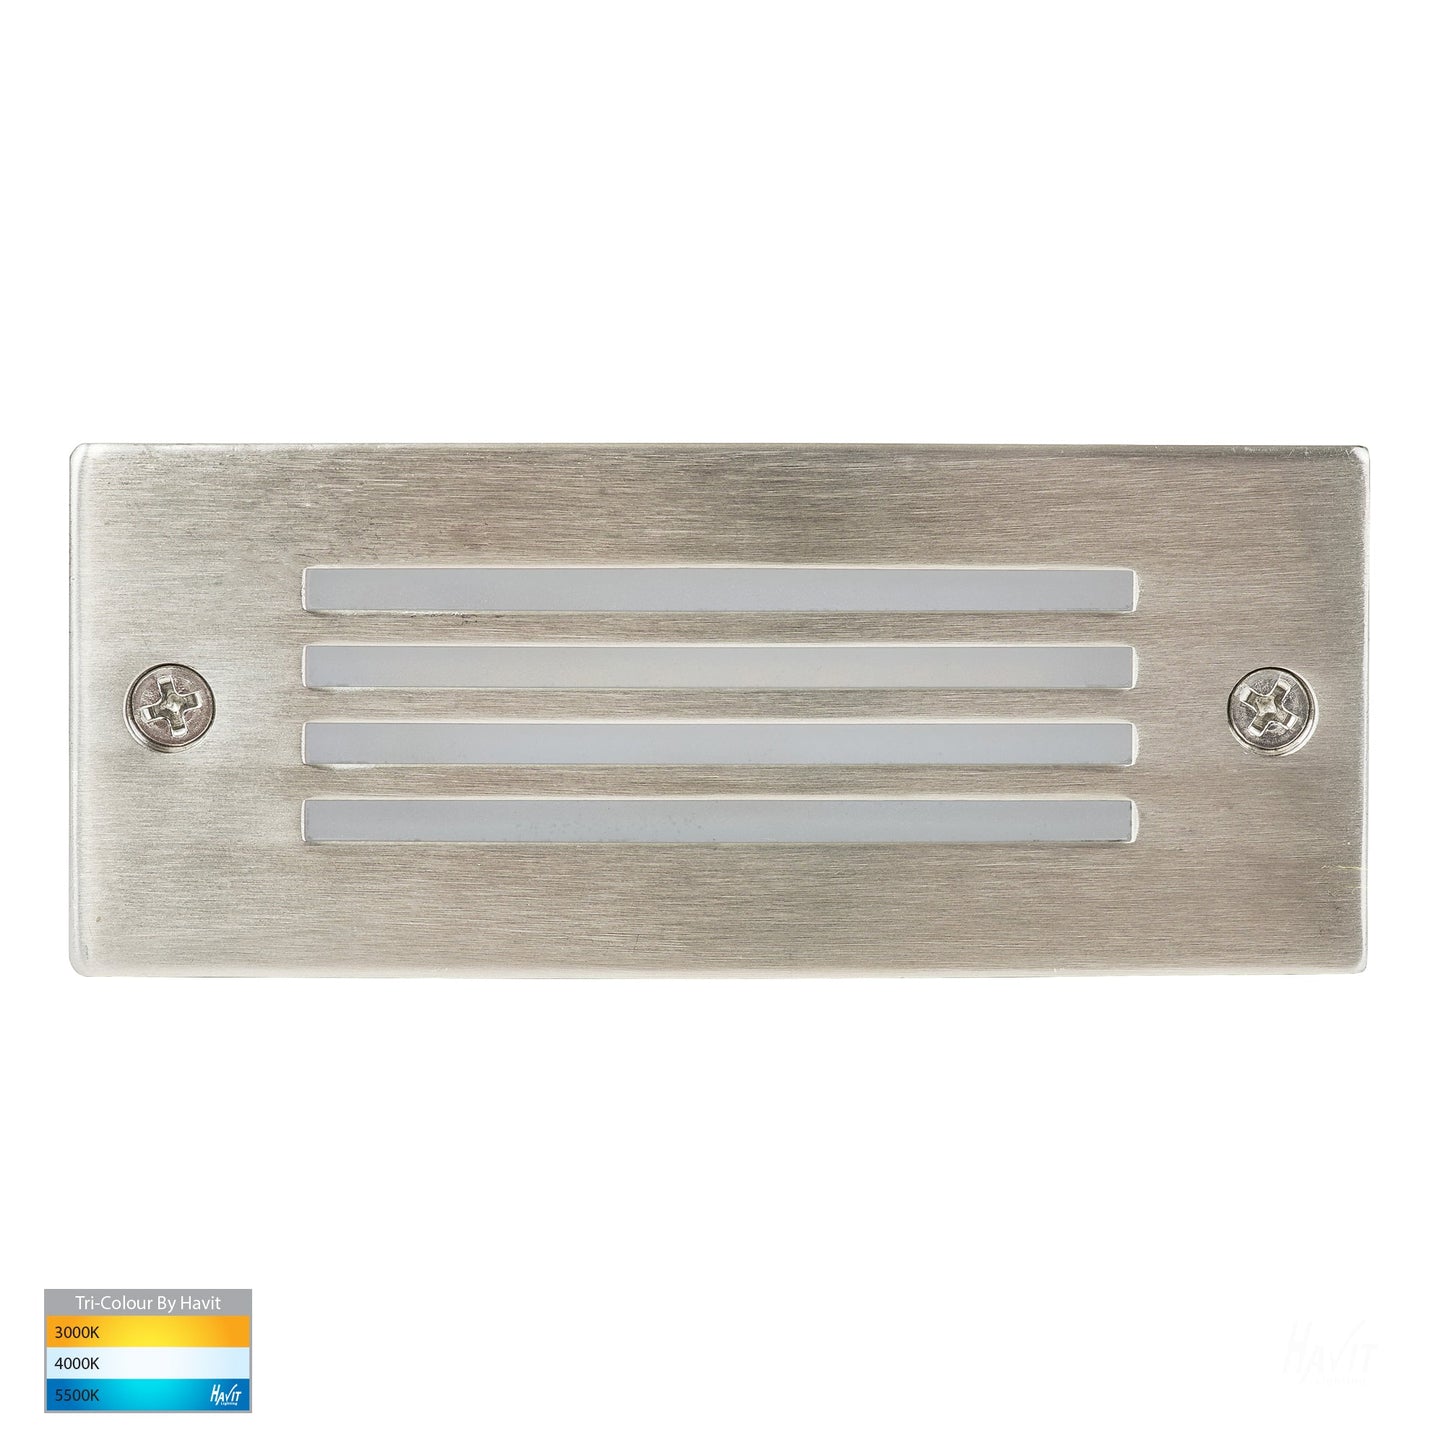 Recessed Brick Light With 316 Stainless Steel Face Grill Cover  HV3006t-Ss316-12v